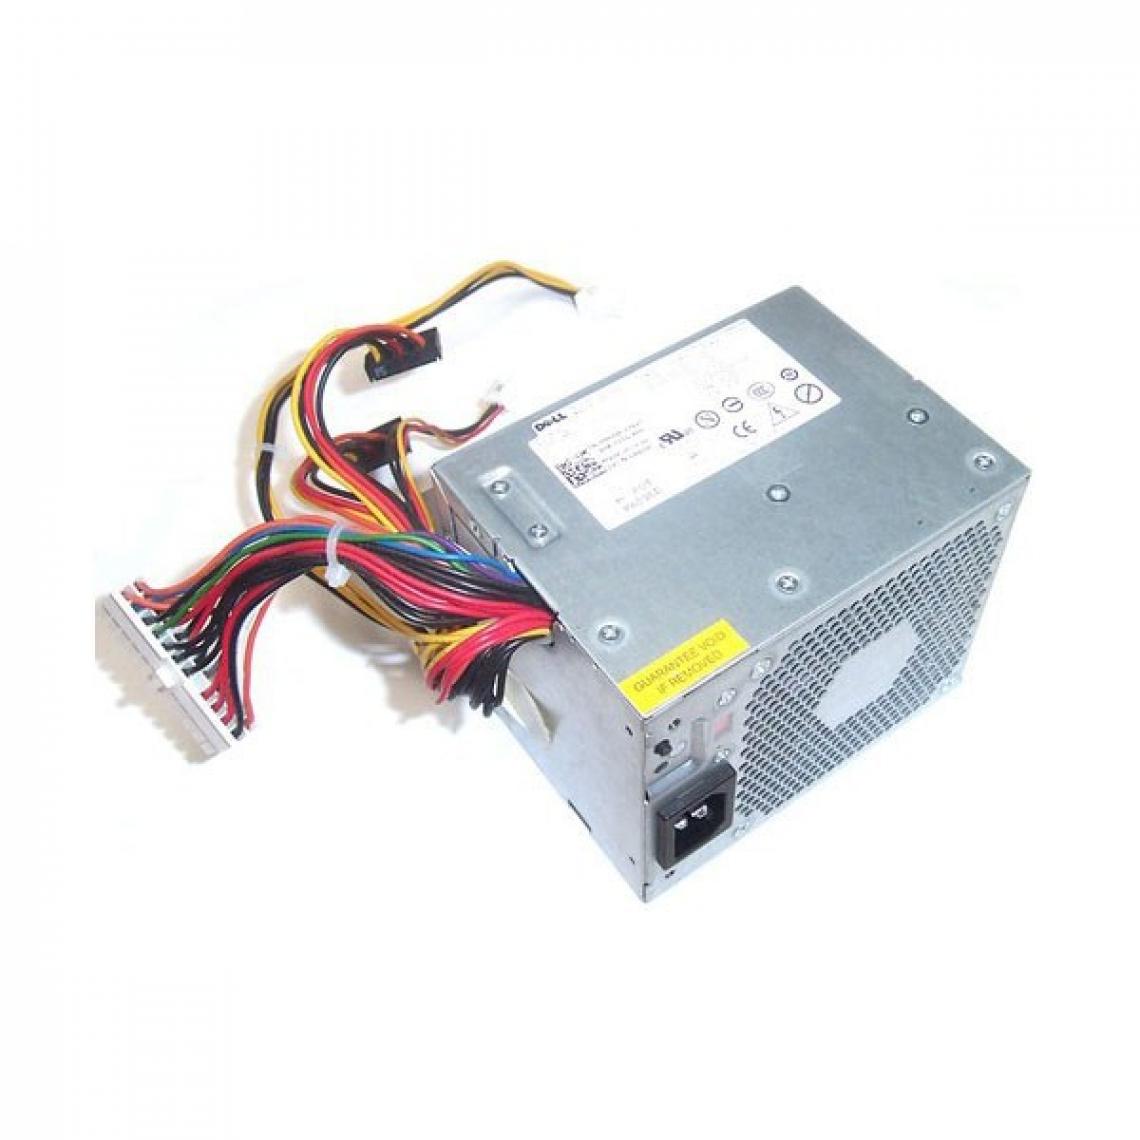 Dell - Alimentation DELL Optiplex 360 380 DT B235PD-00 CDE0235P5W 0D233N Power Supply - Alimentation modulaire